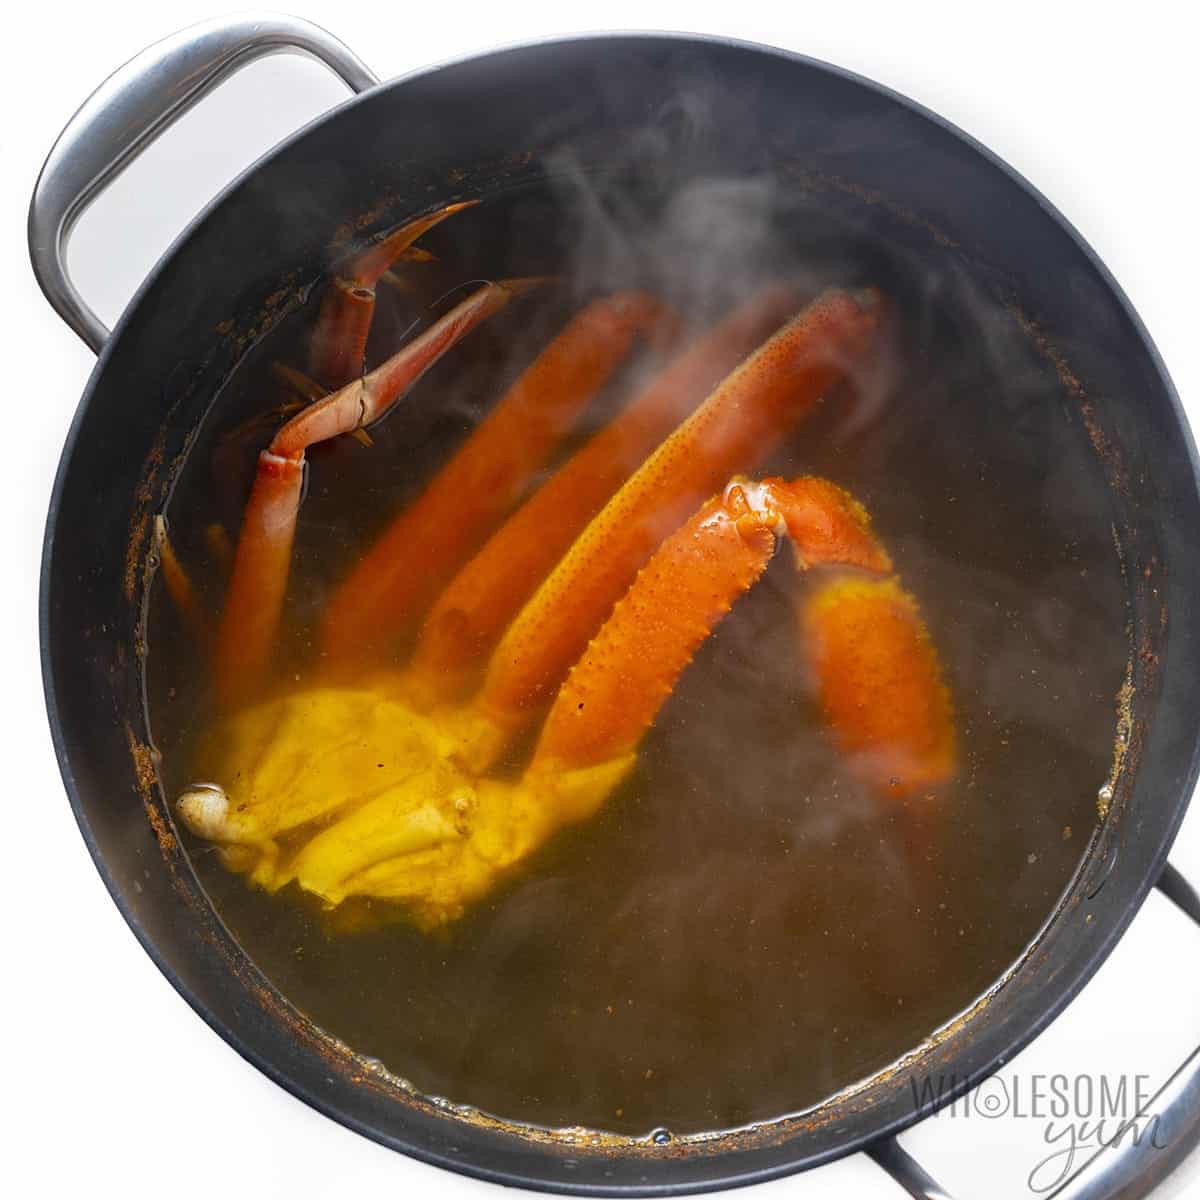 Put the crab legs into the pot and cook.